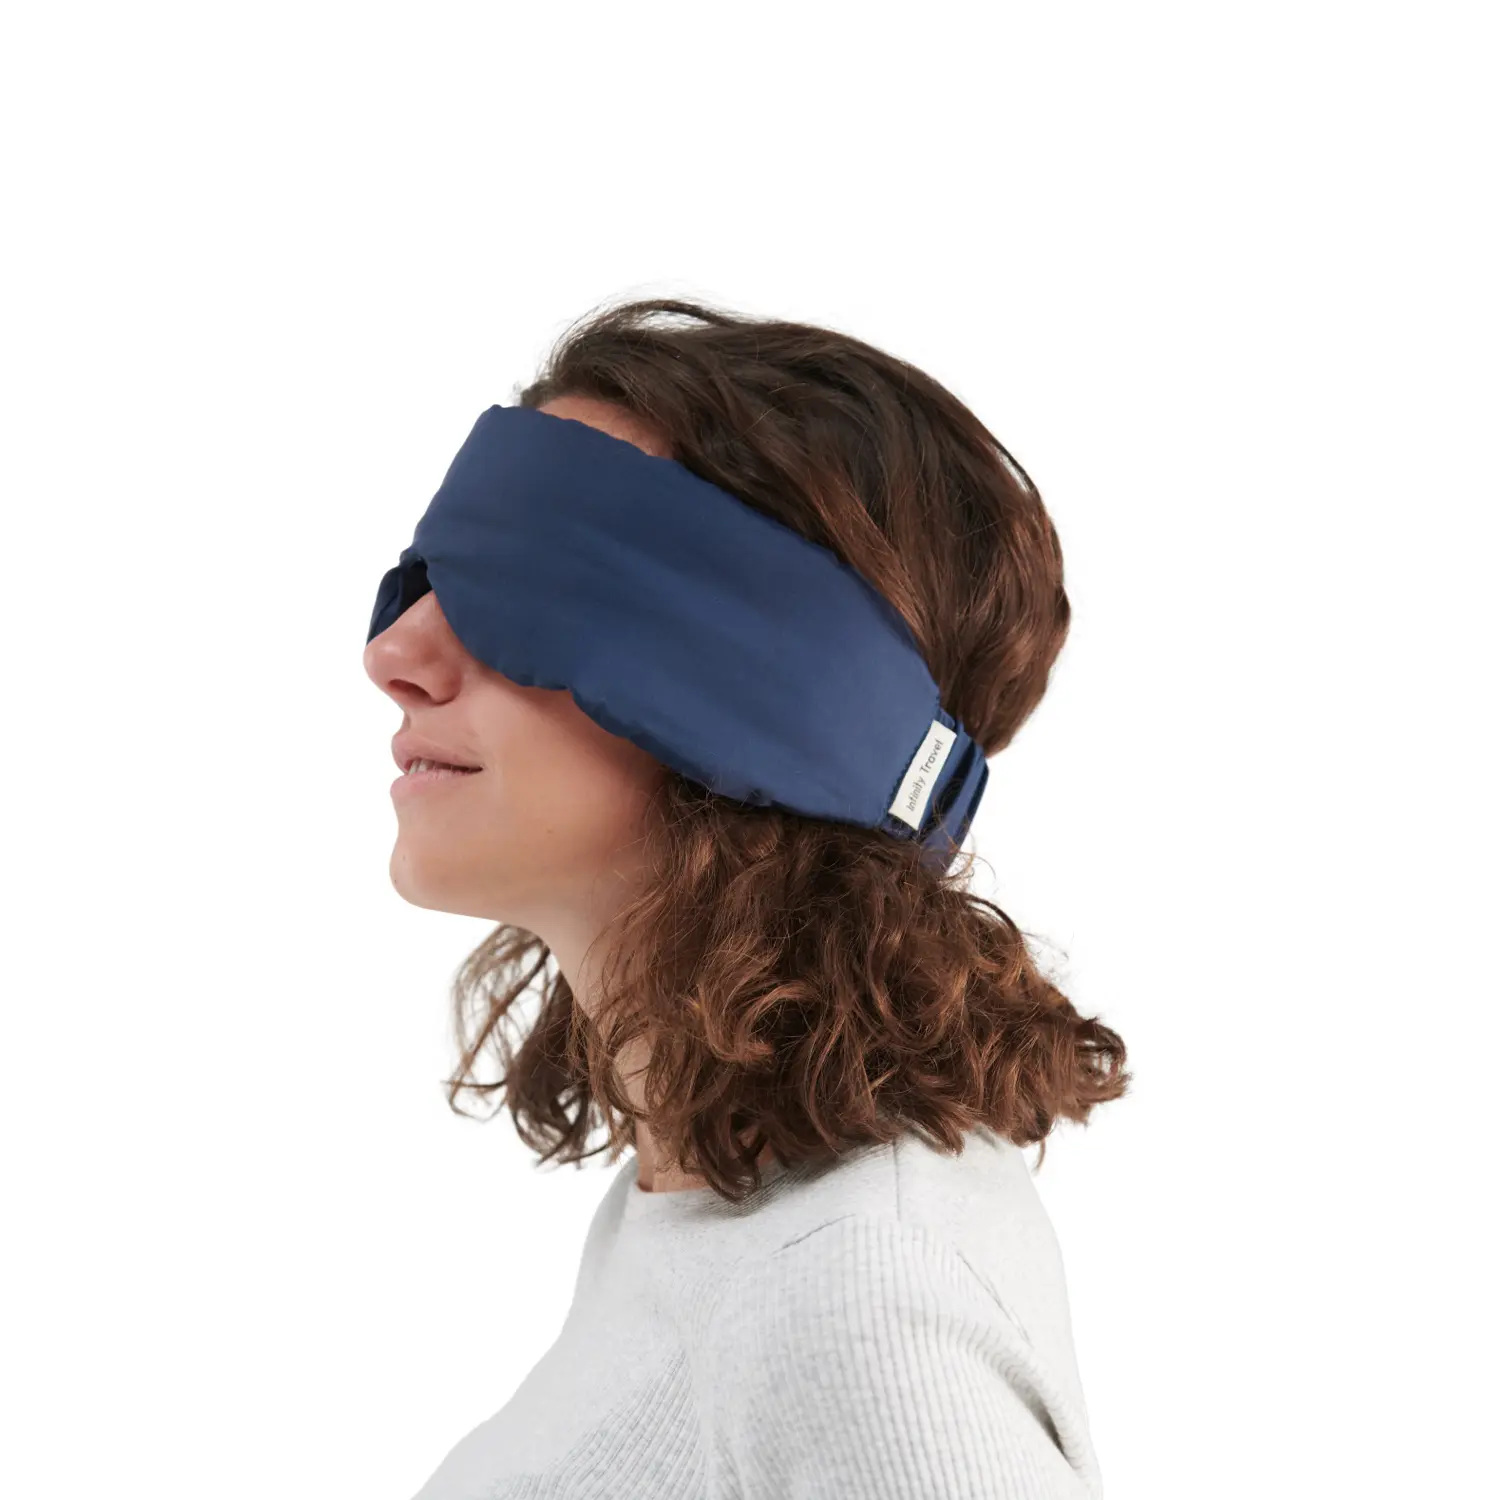 Bamboo Sleep Mask 2 - The Softest Mask Perfect Fit